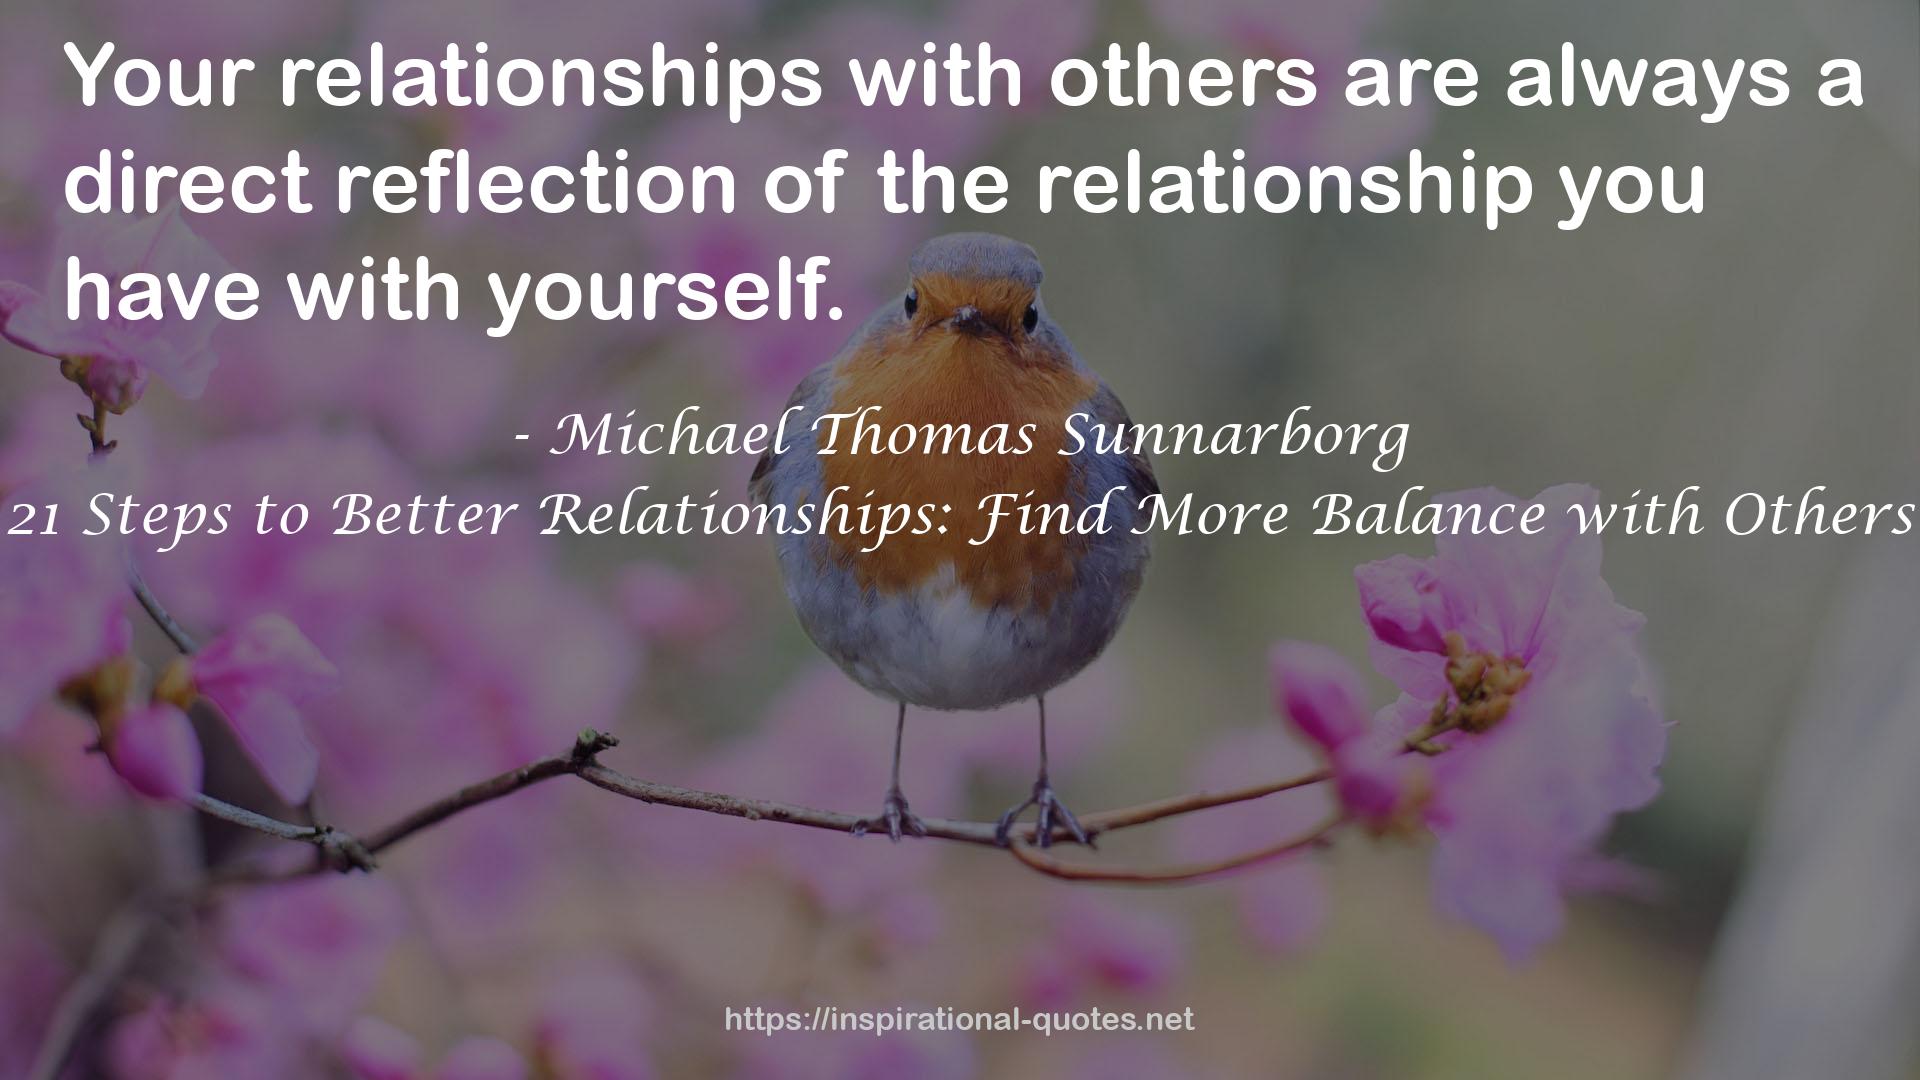 21 Steps to Better Relationships: Find More Balance with Others QUOTES